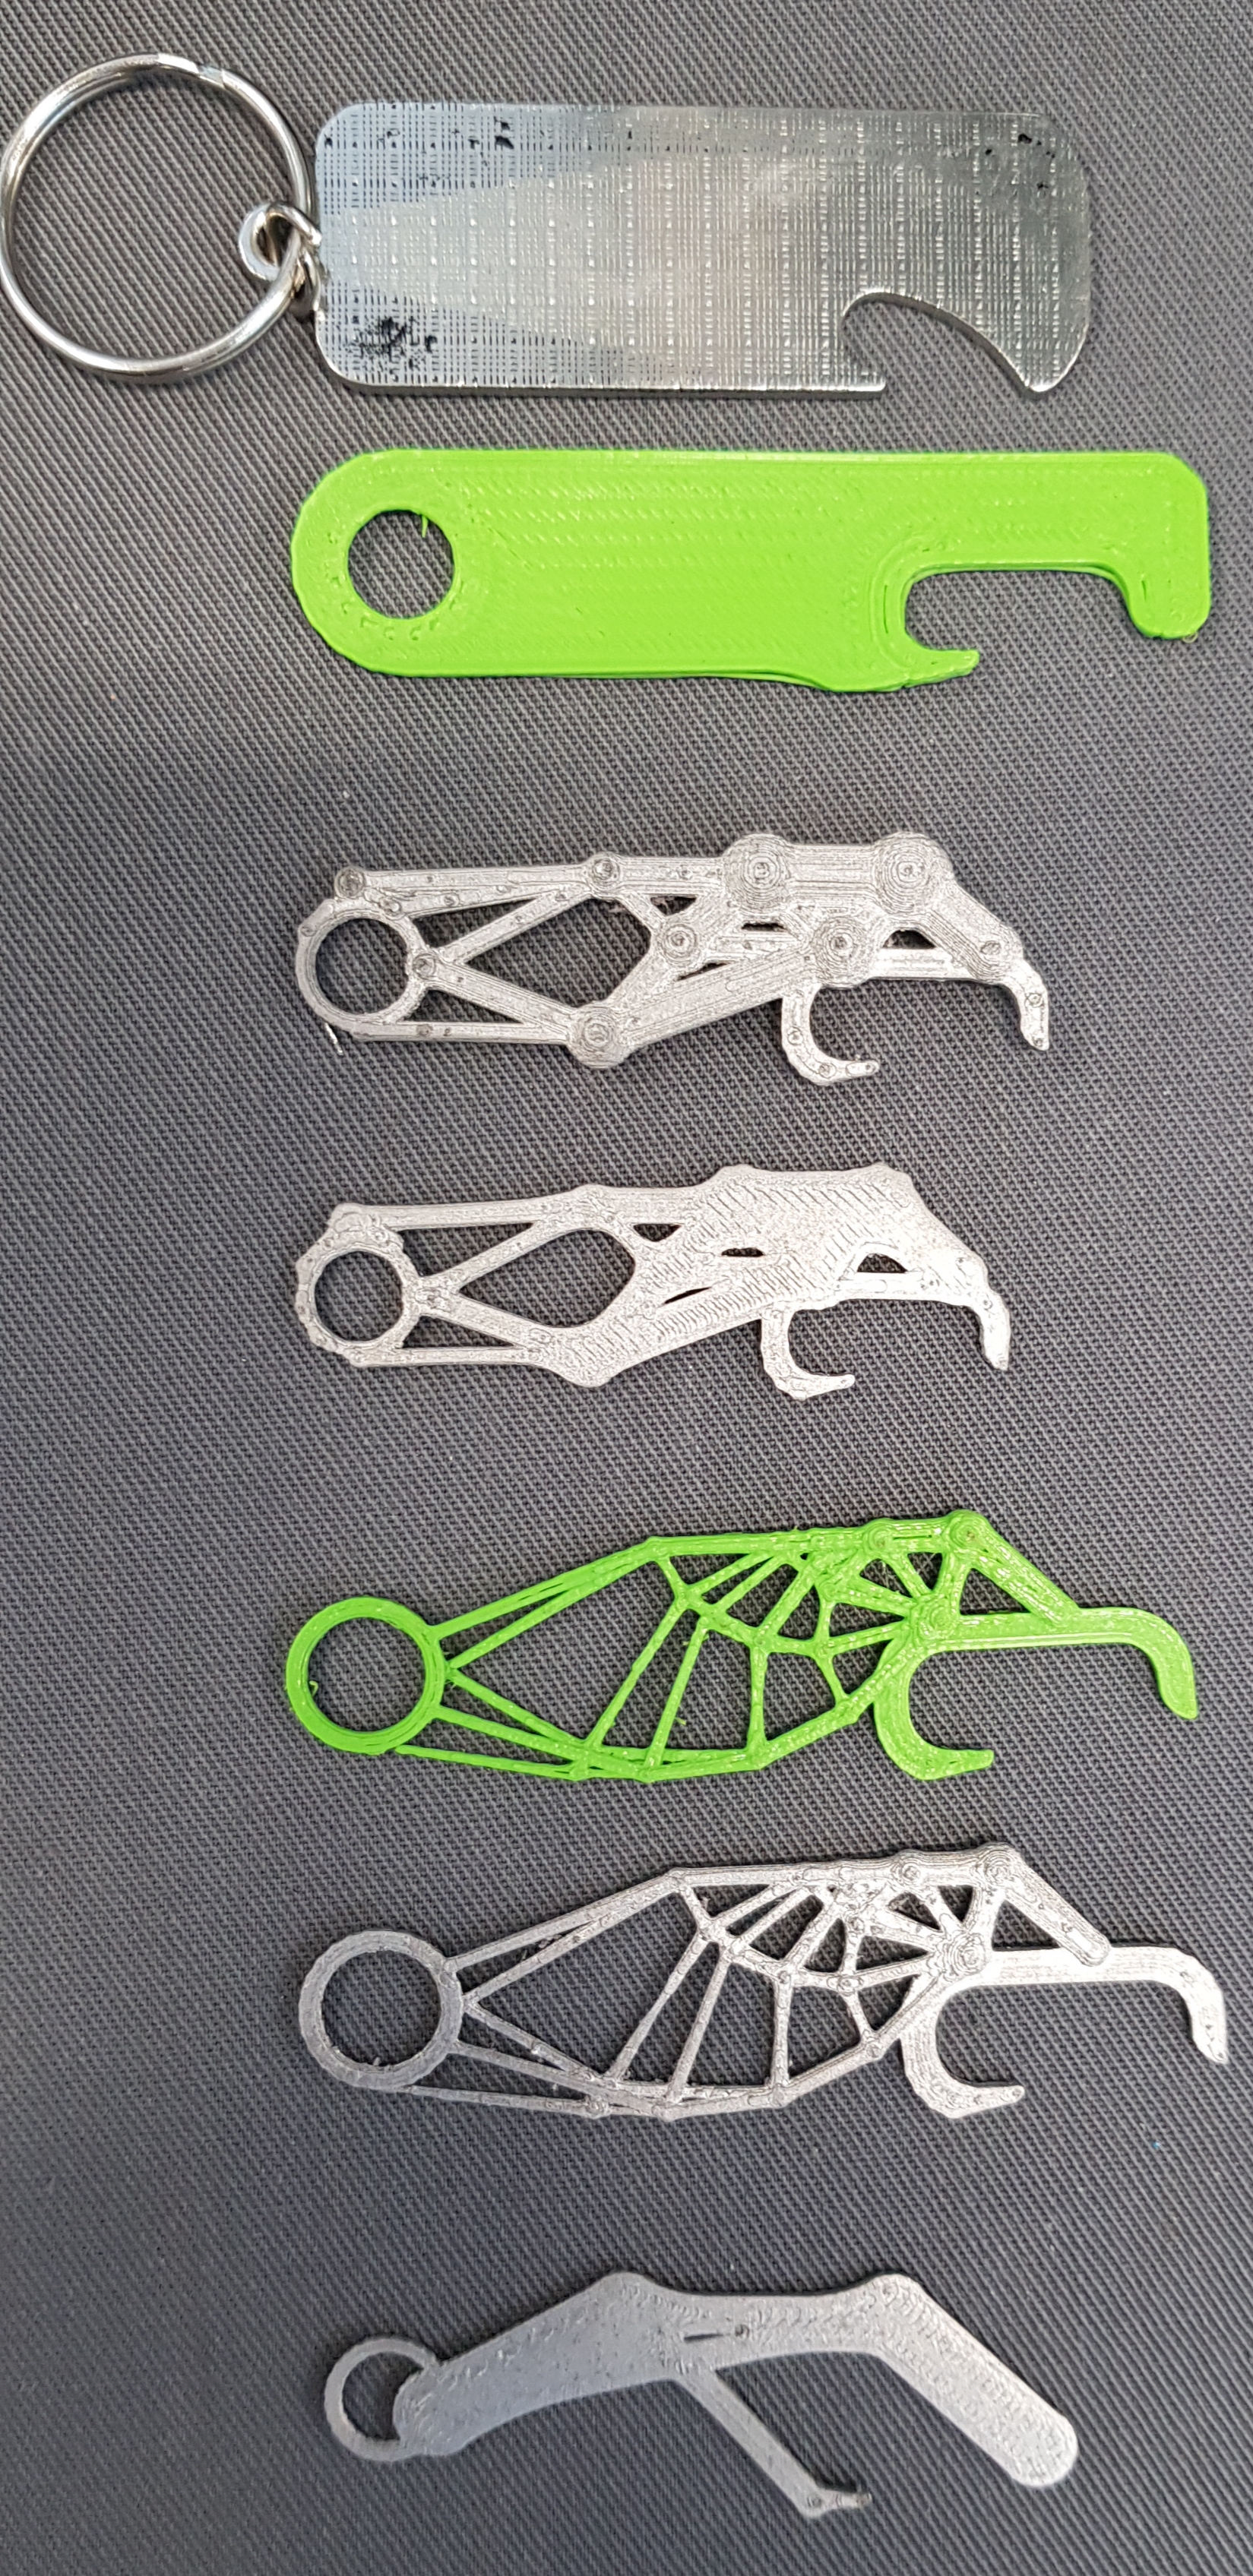 Examples of bottle openers produced during a sixth form work experience project on iterative design at the RTC - Examples of bottle openers produced during a sixth form work experience project on iterative design at the RTC